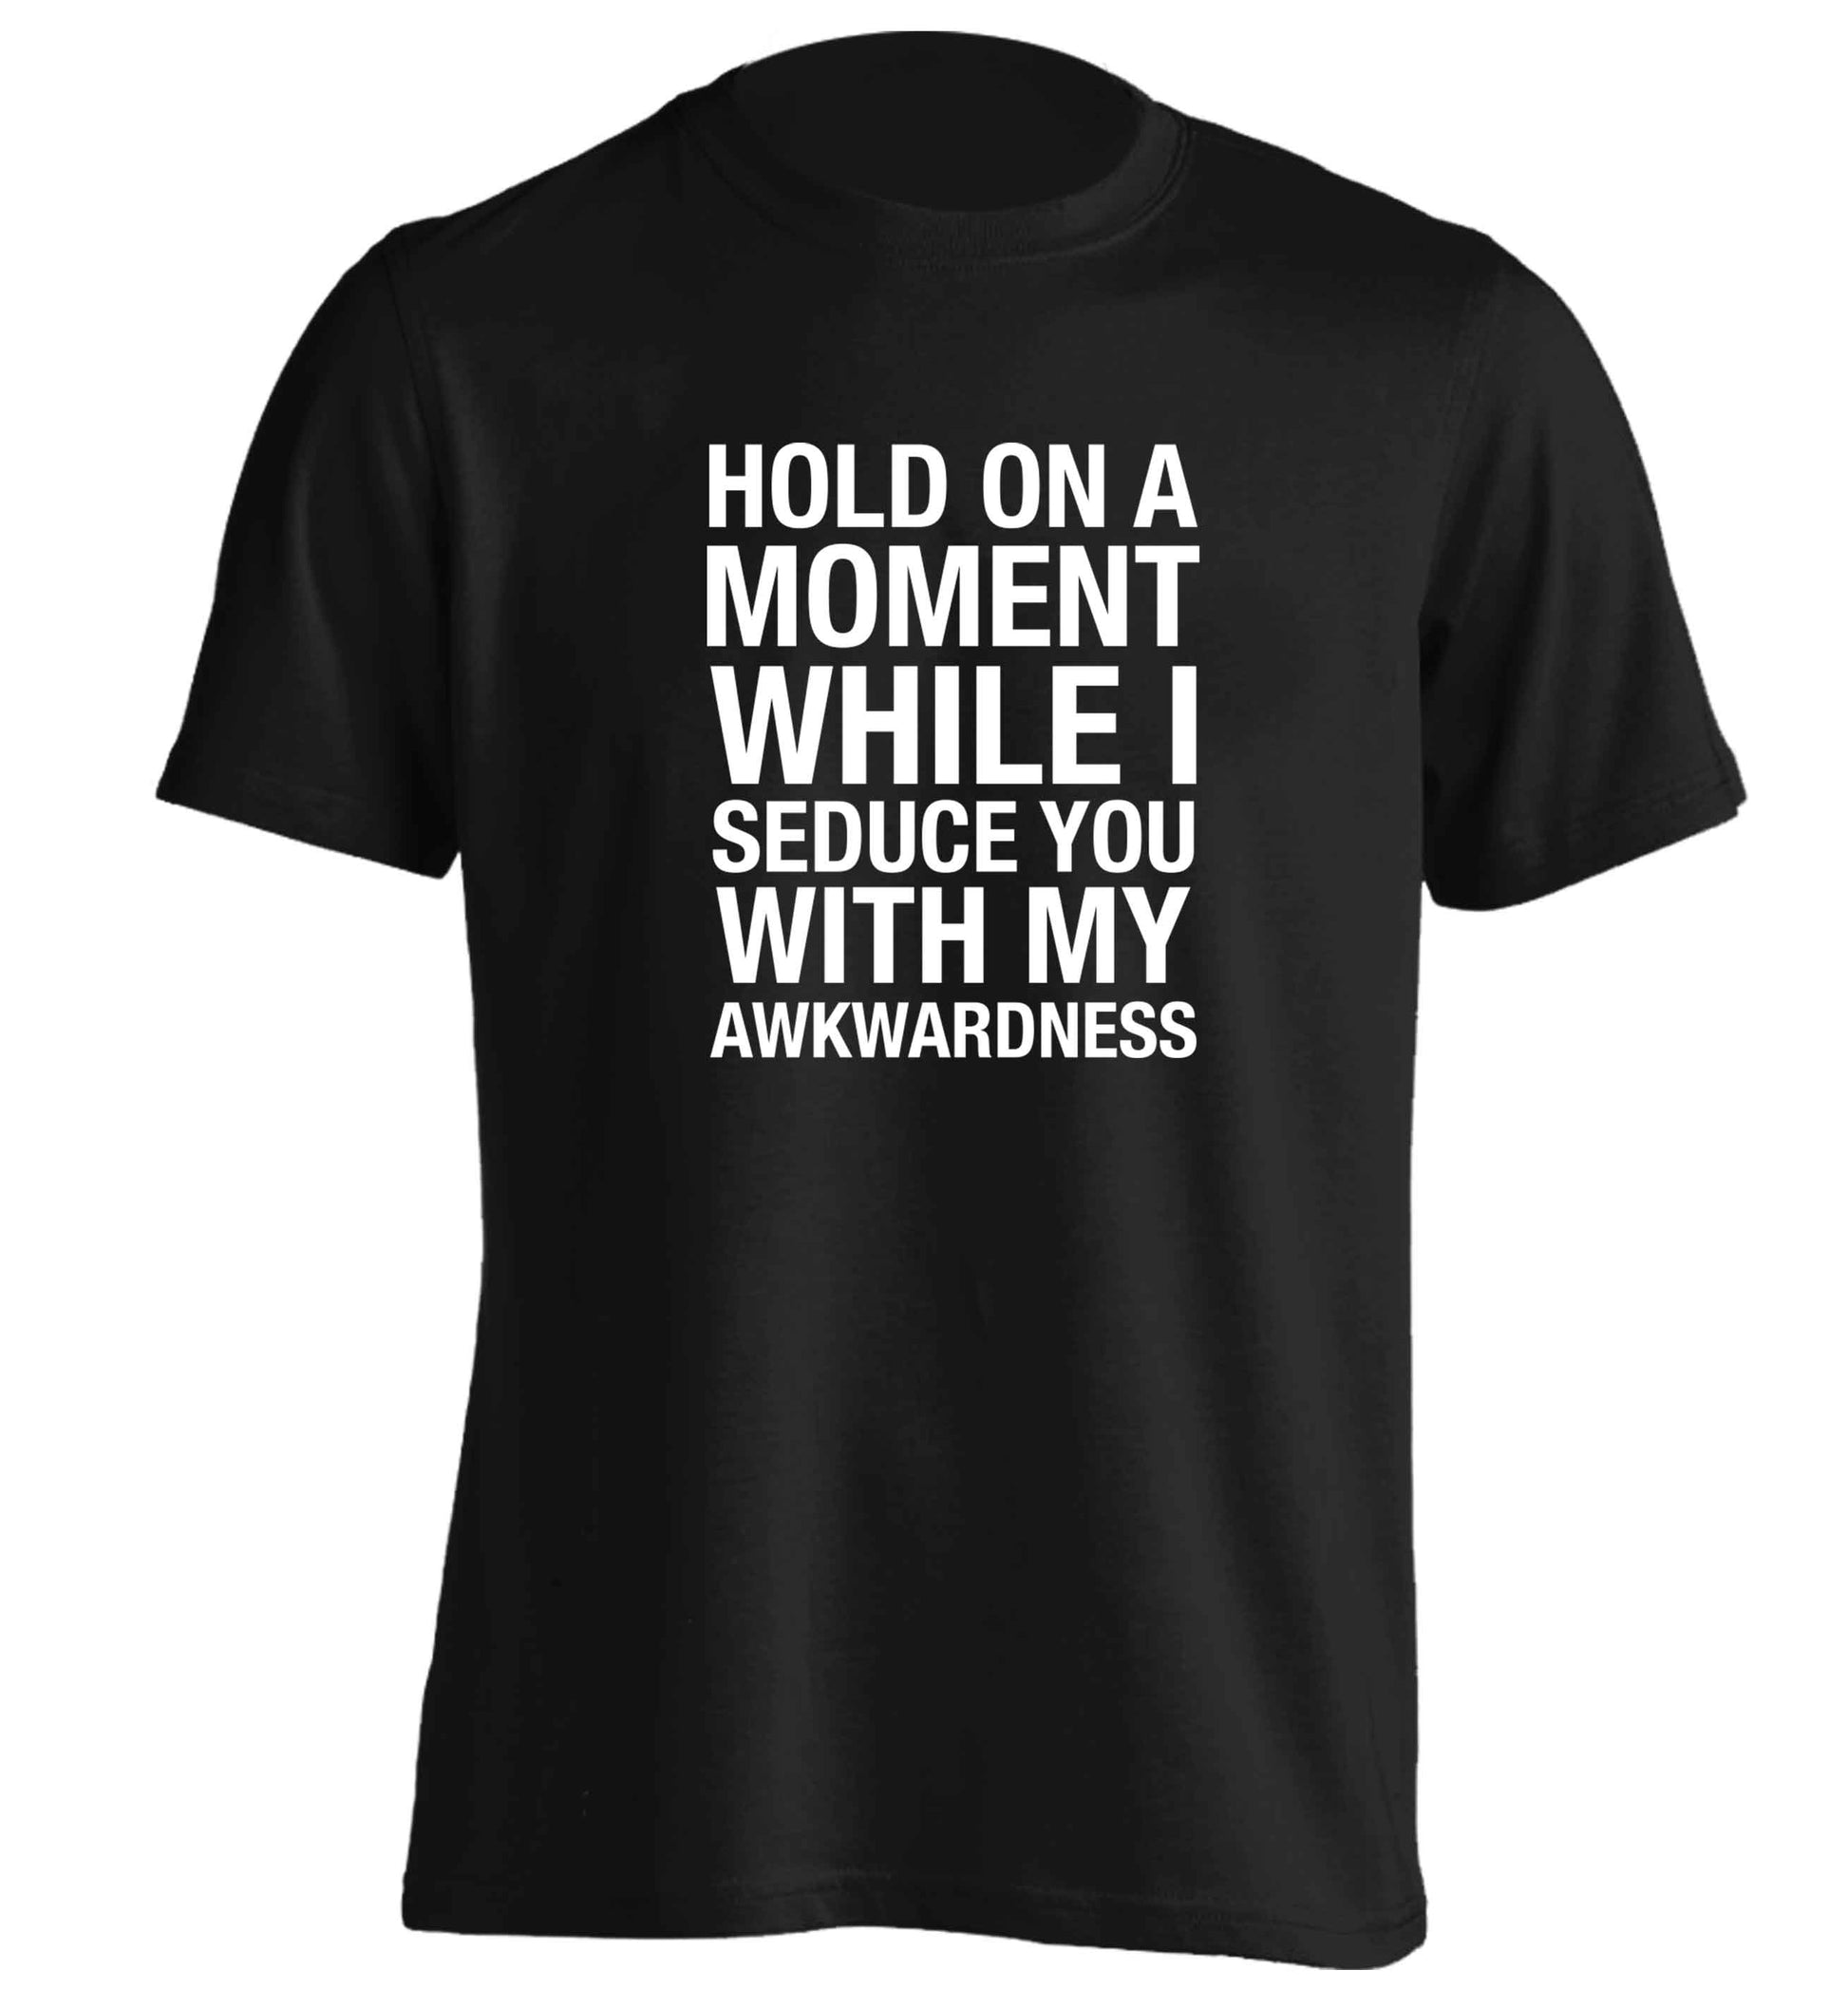 Hold on a moment while I seduce you with my awkwardness adults unisex black Tshirt 2XL